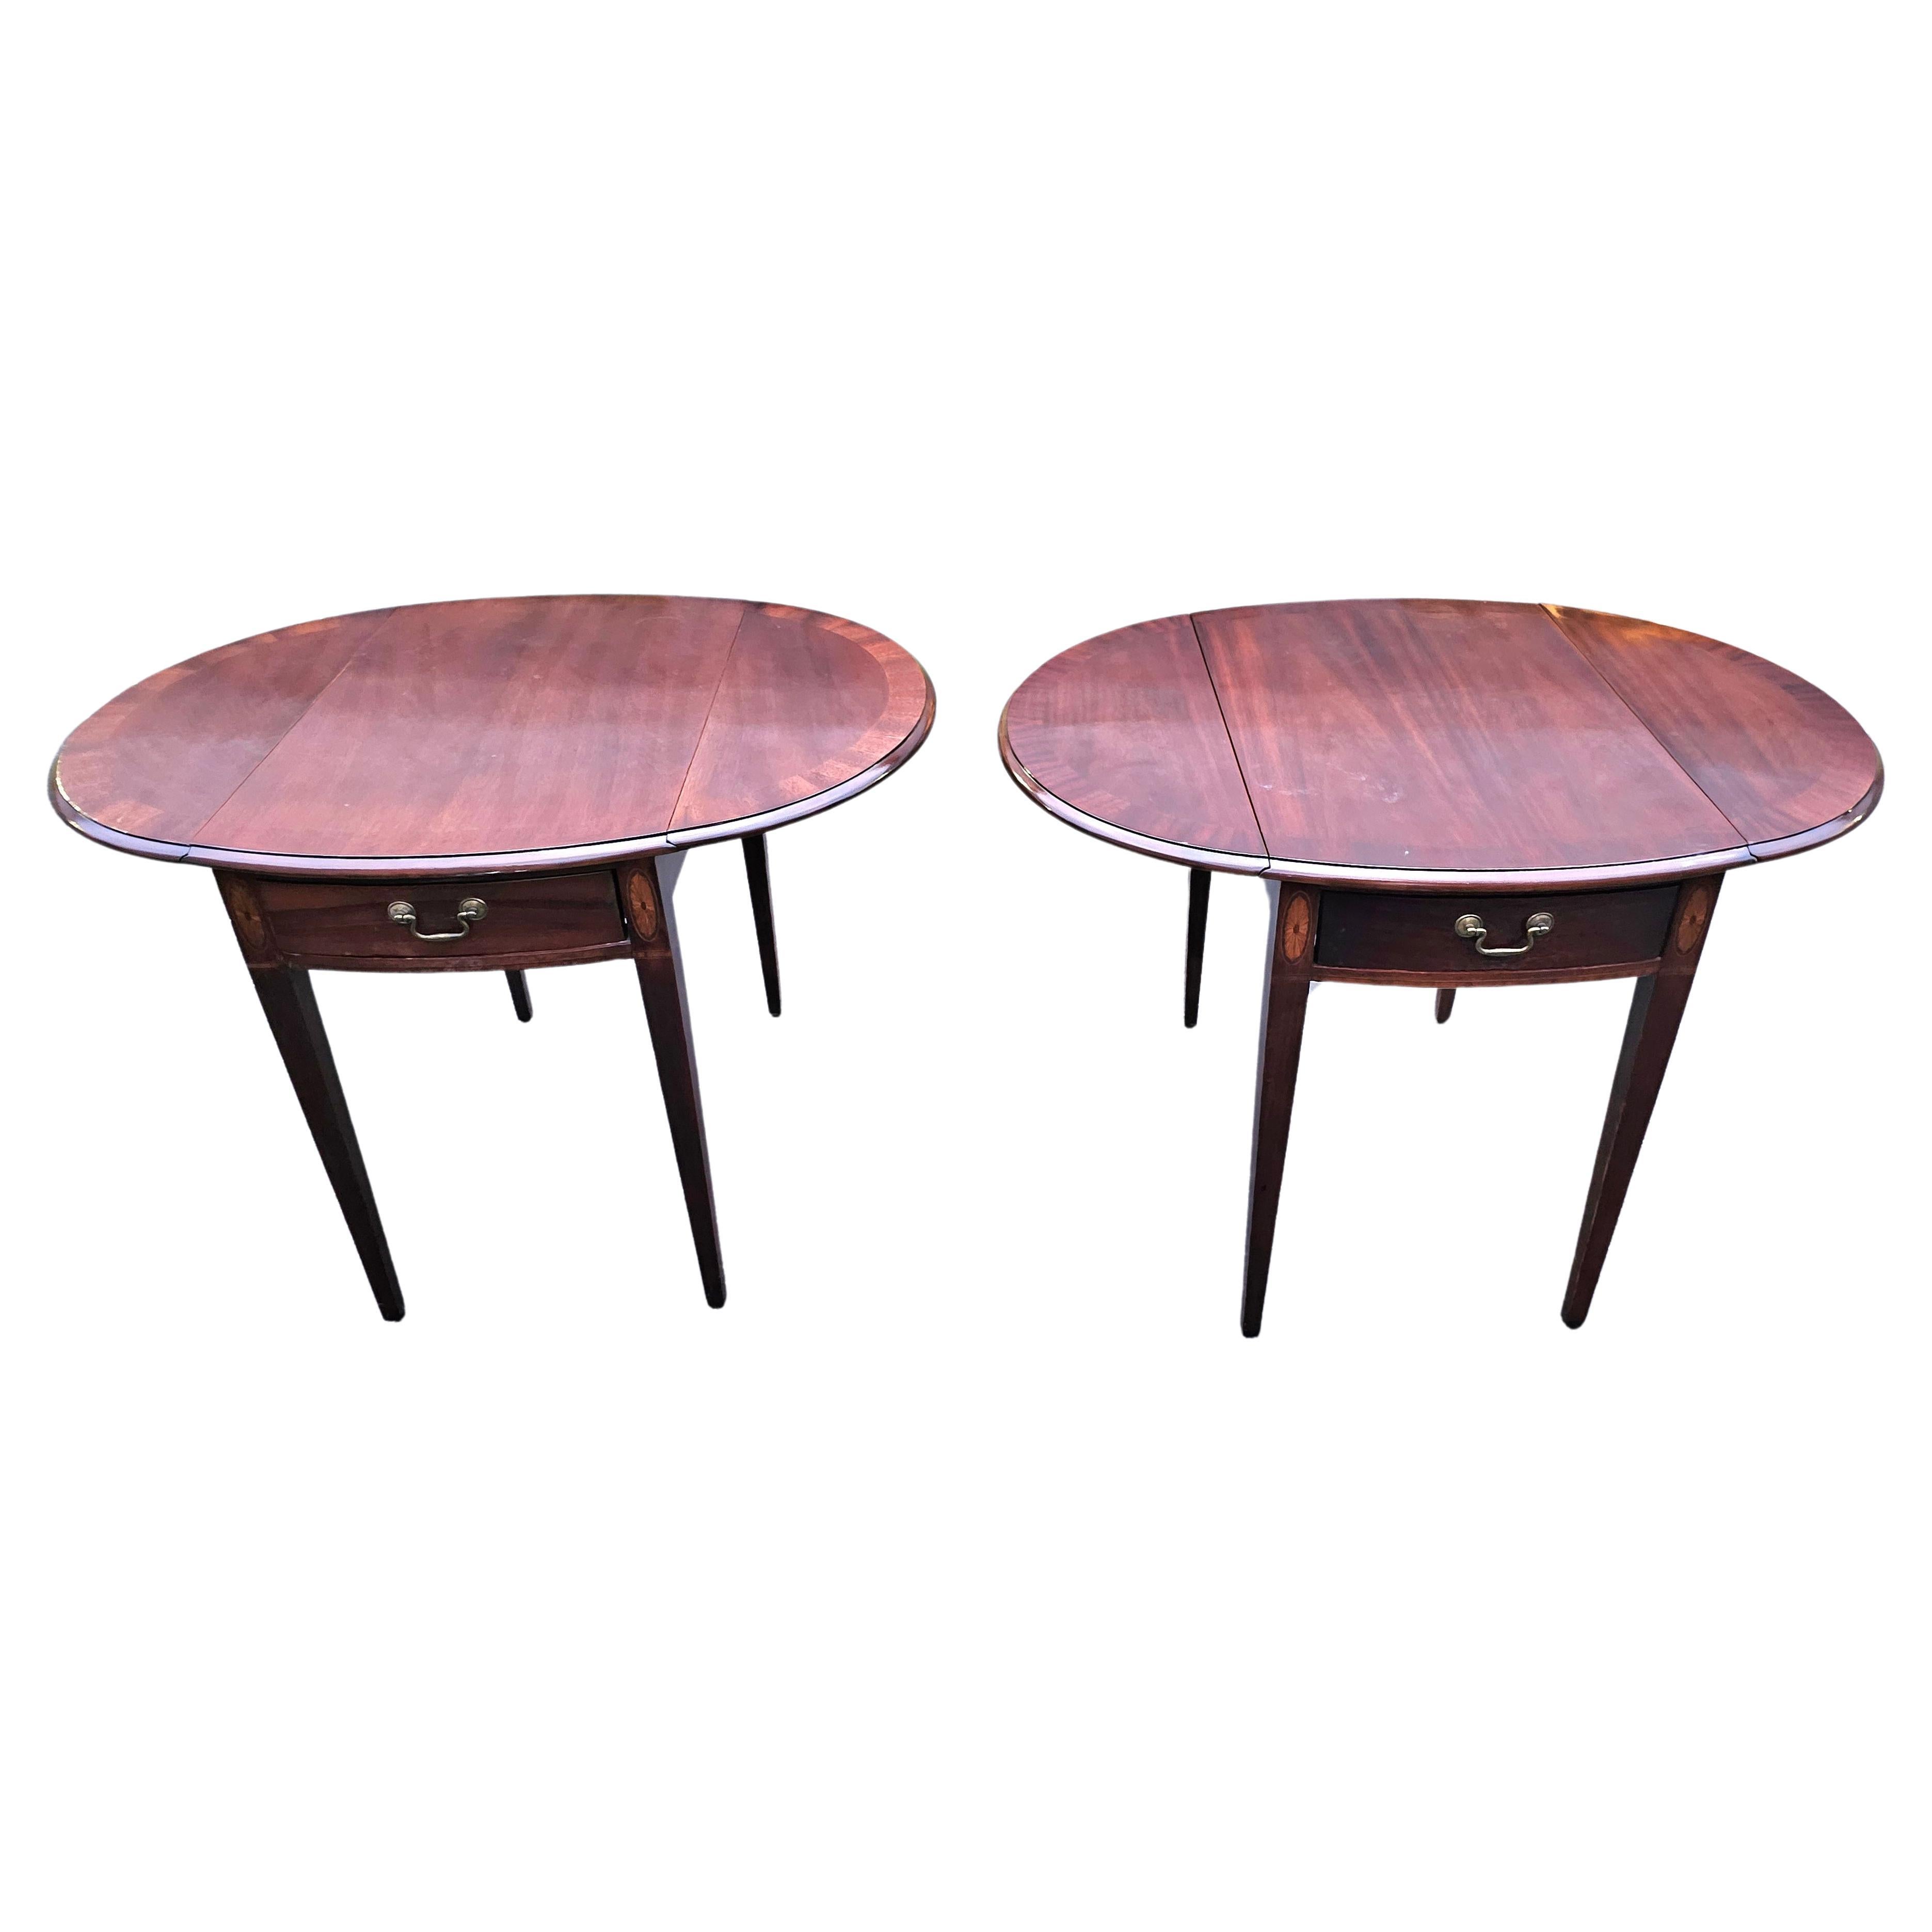 American Pair of Magogany Banded and Satinwood Inlaid Pembroke Drop-Leaf Side Tables